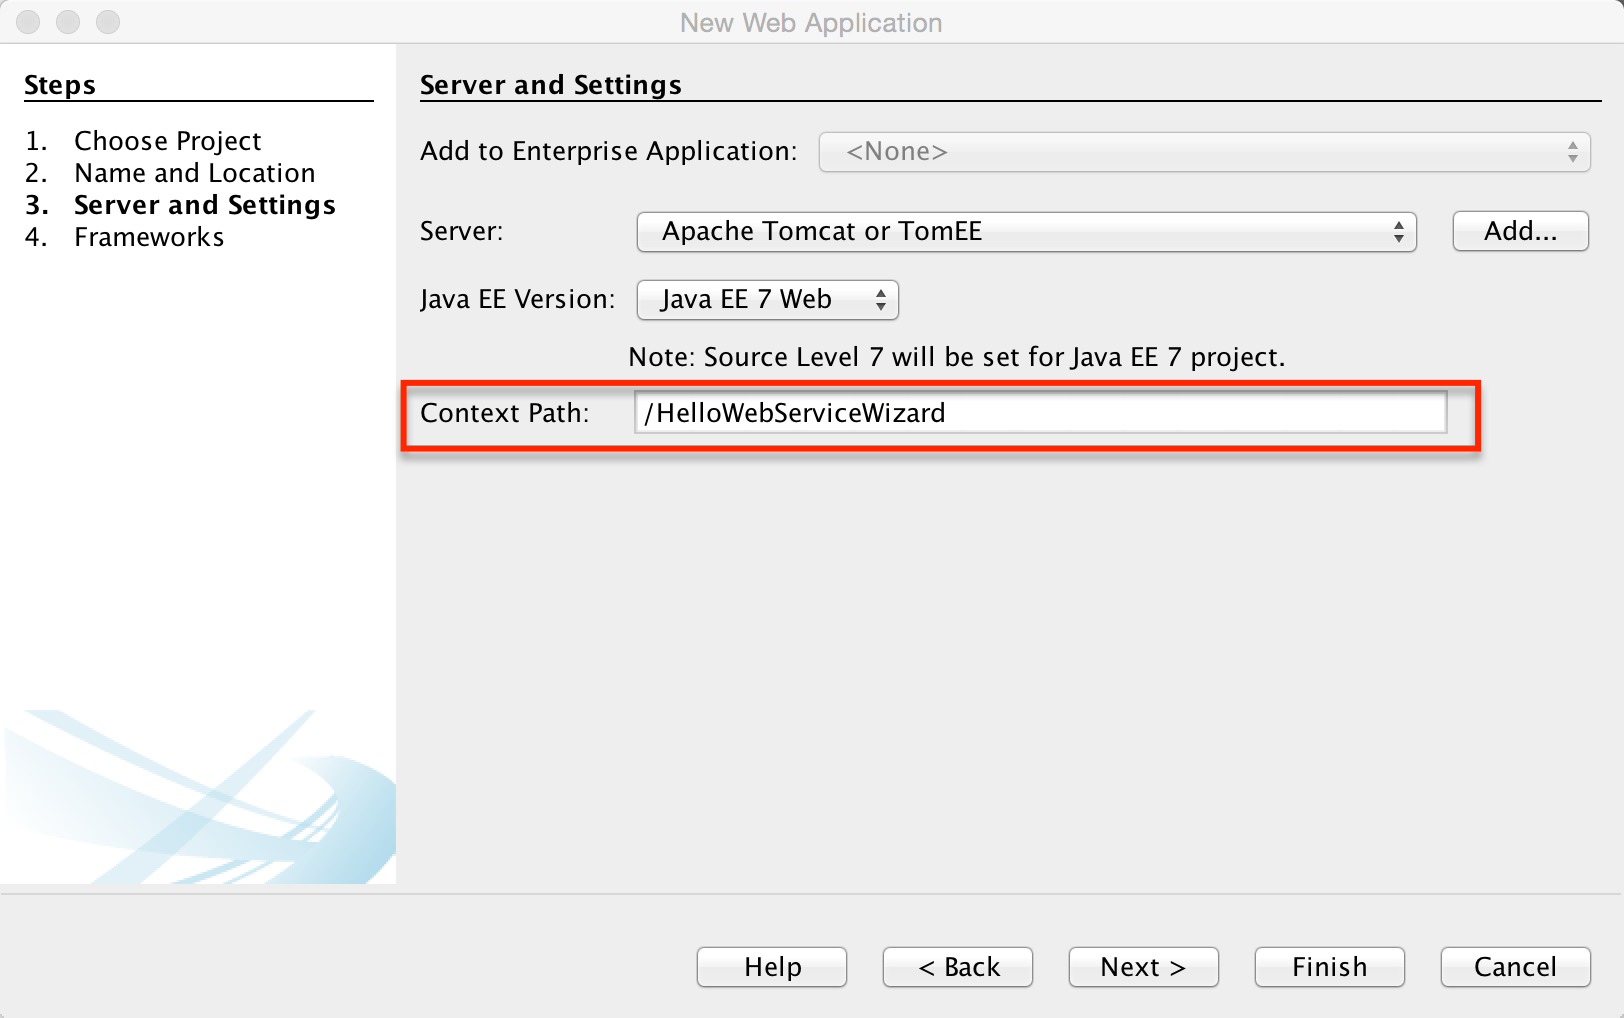 Configure the application server to the newly created app